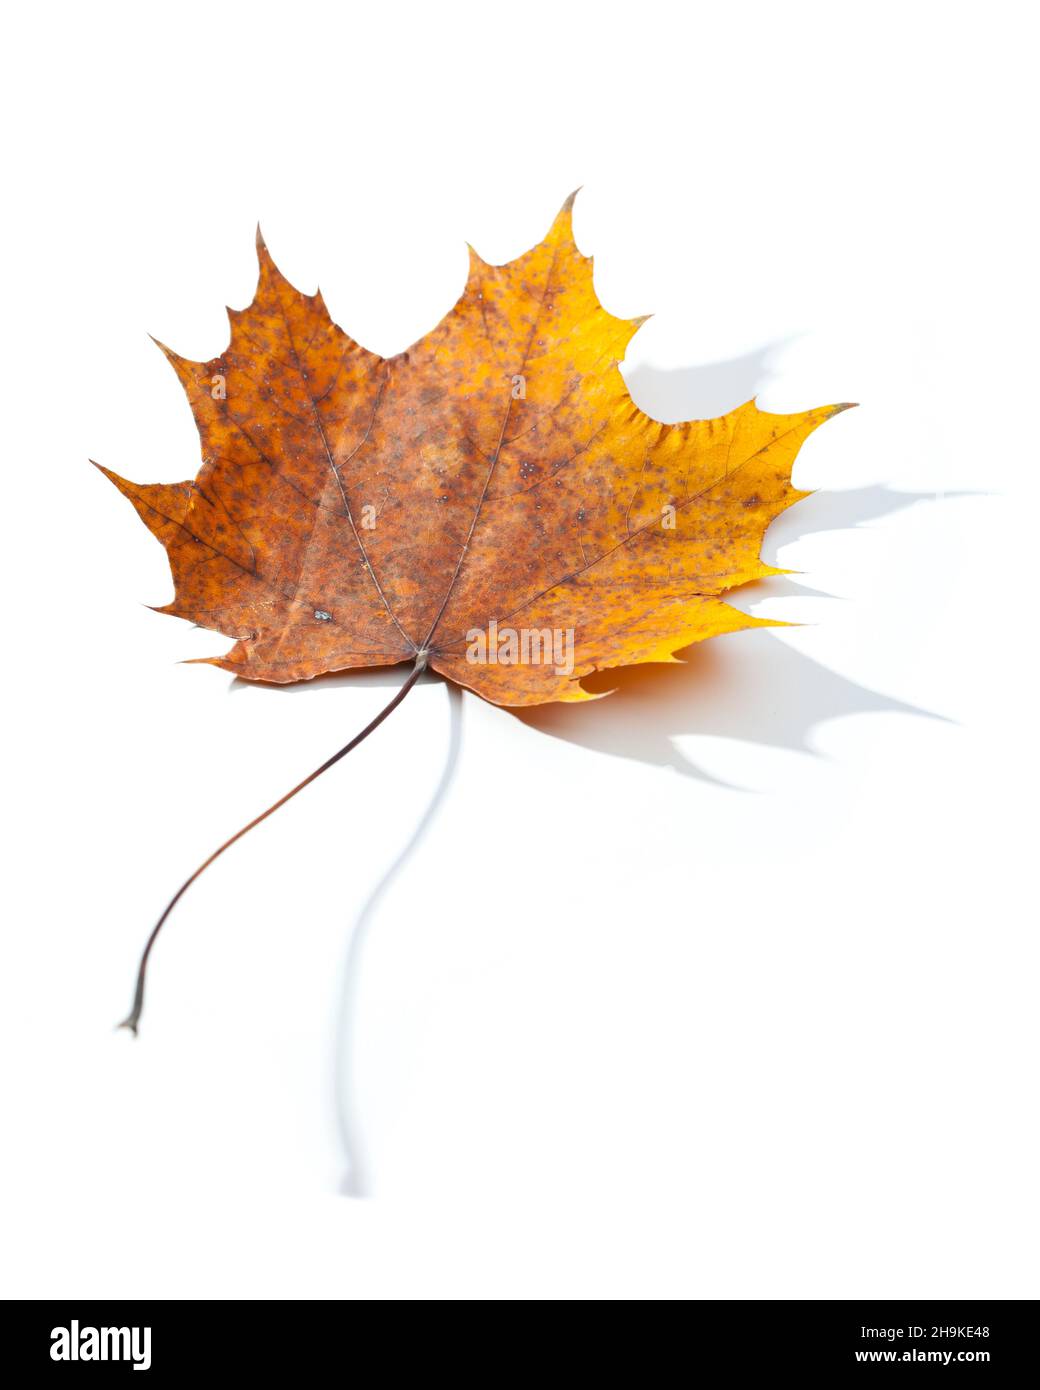 maple, leaf, shadow, old, stalk, stem, white, background, fallen, lying, yellow, brown, withered, single, one, alone, diagonal, oblique, tips, corrupt Stock Photo